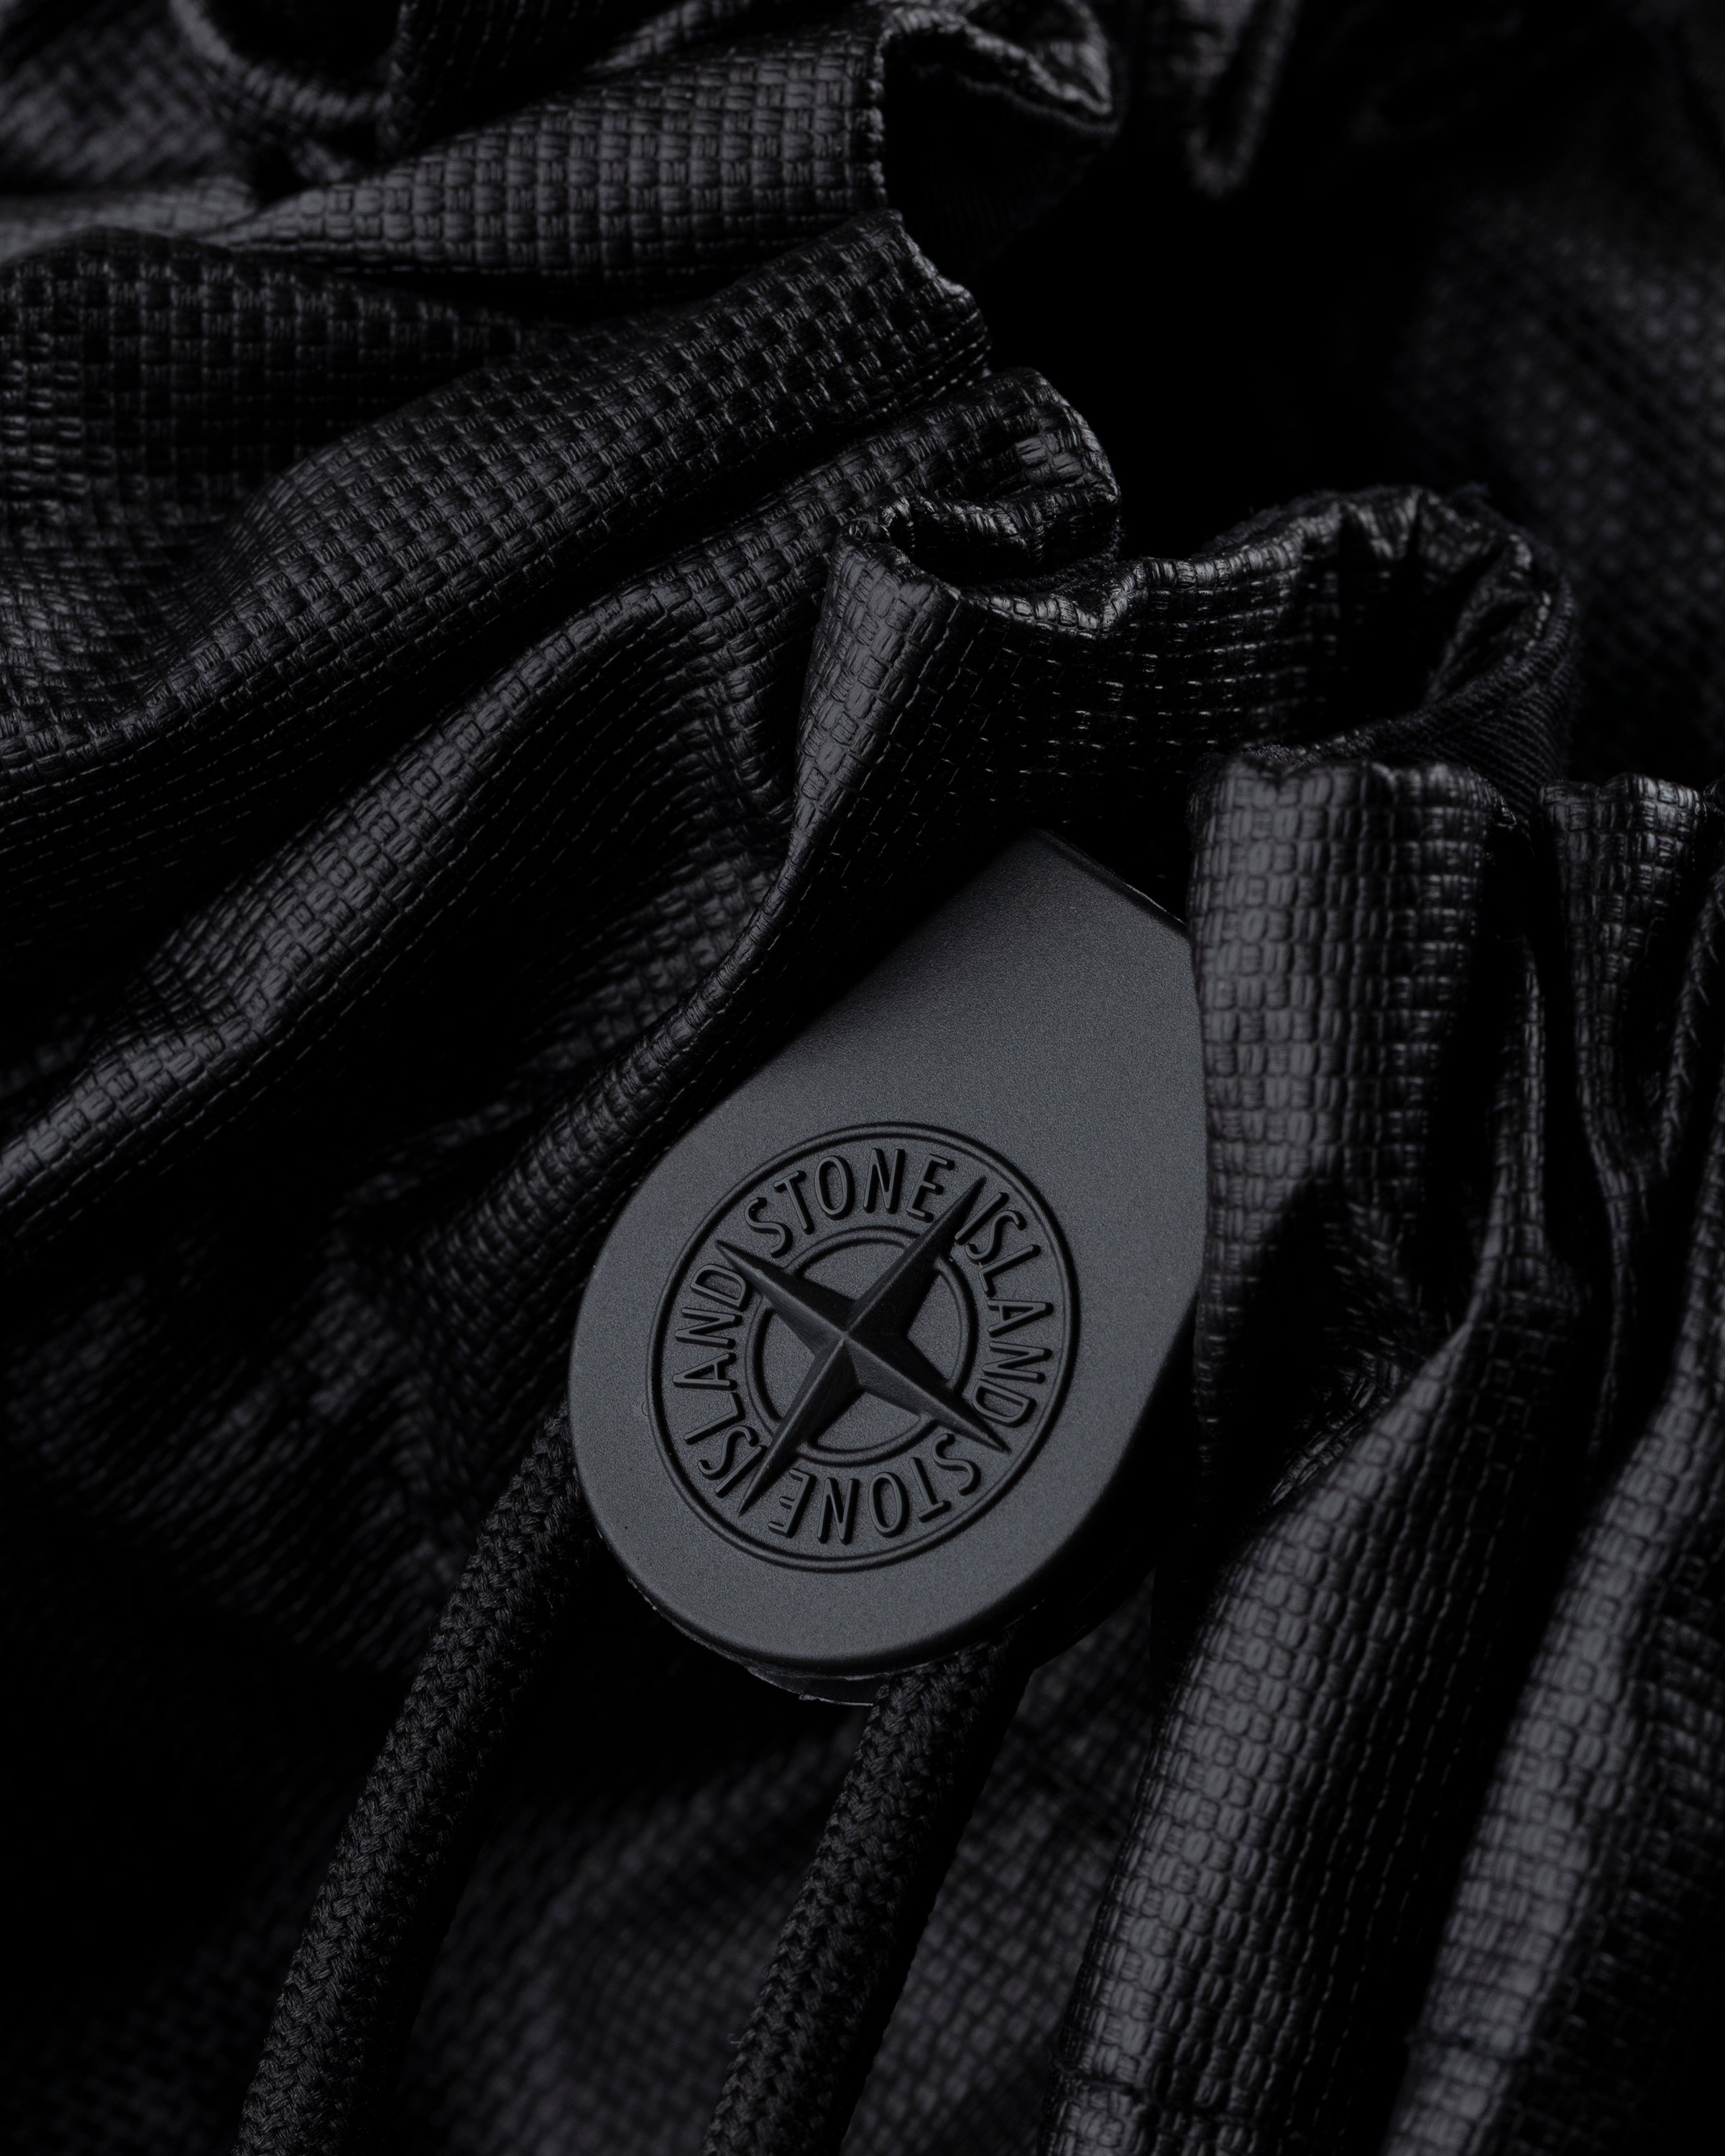 Stone Island - 90370 Dyed Backpack Black - Accessories - Black - Image 8